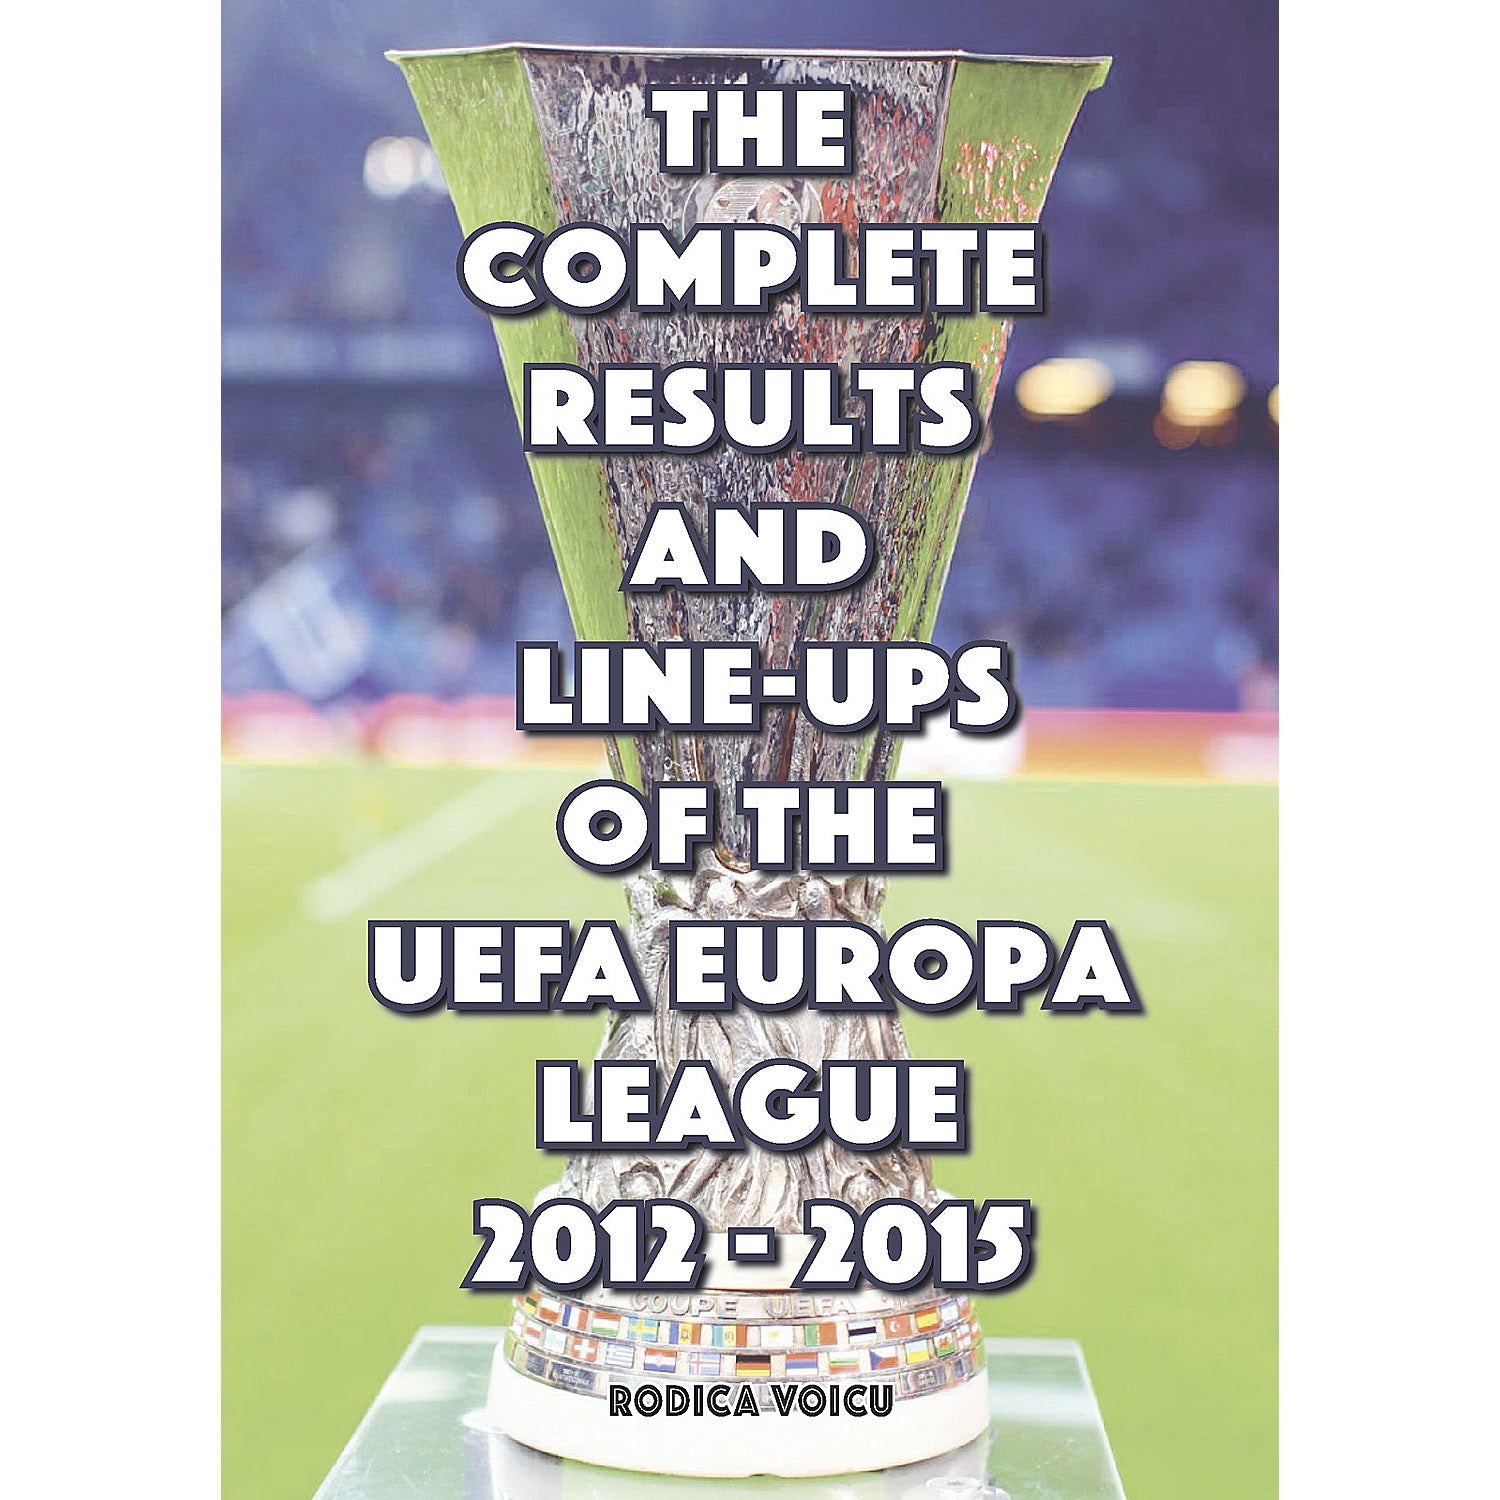 The Complete Results & Line-ups of the UEFA Europa League 2012-2015